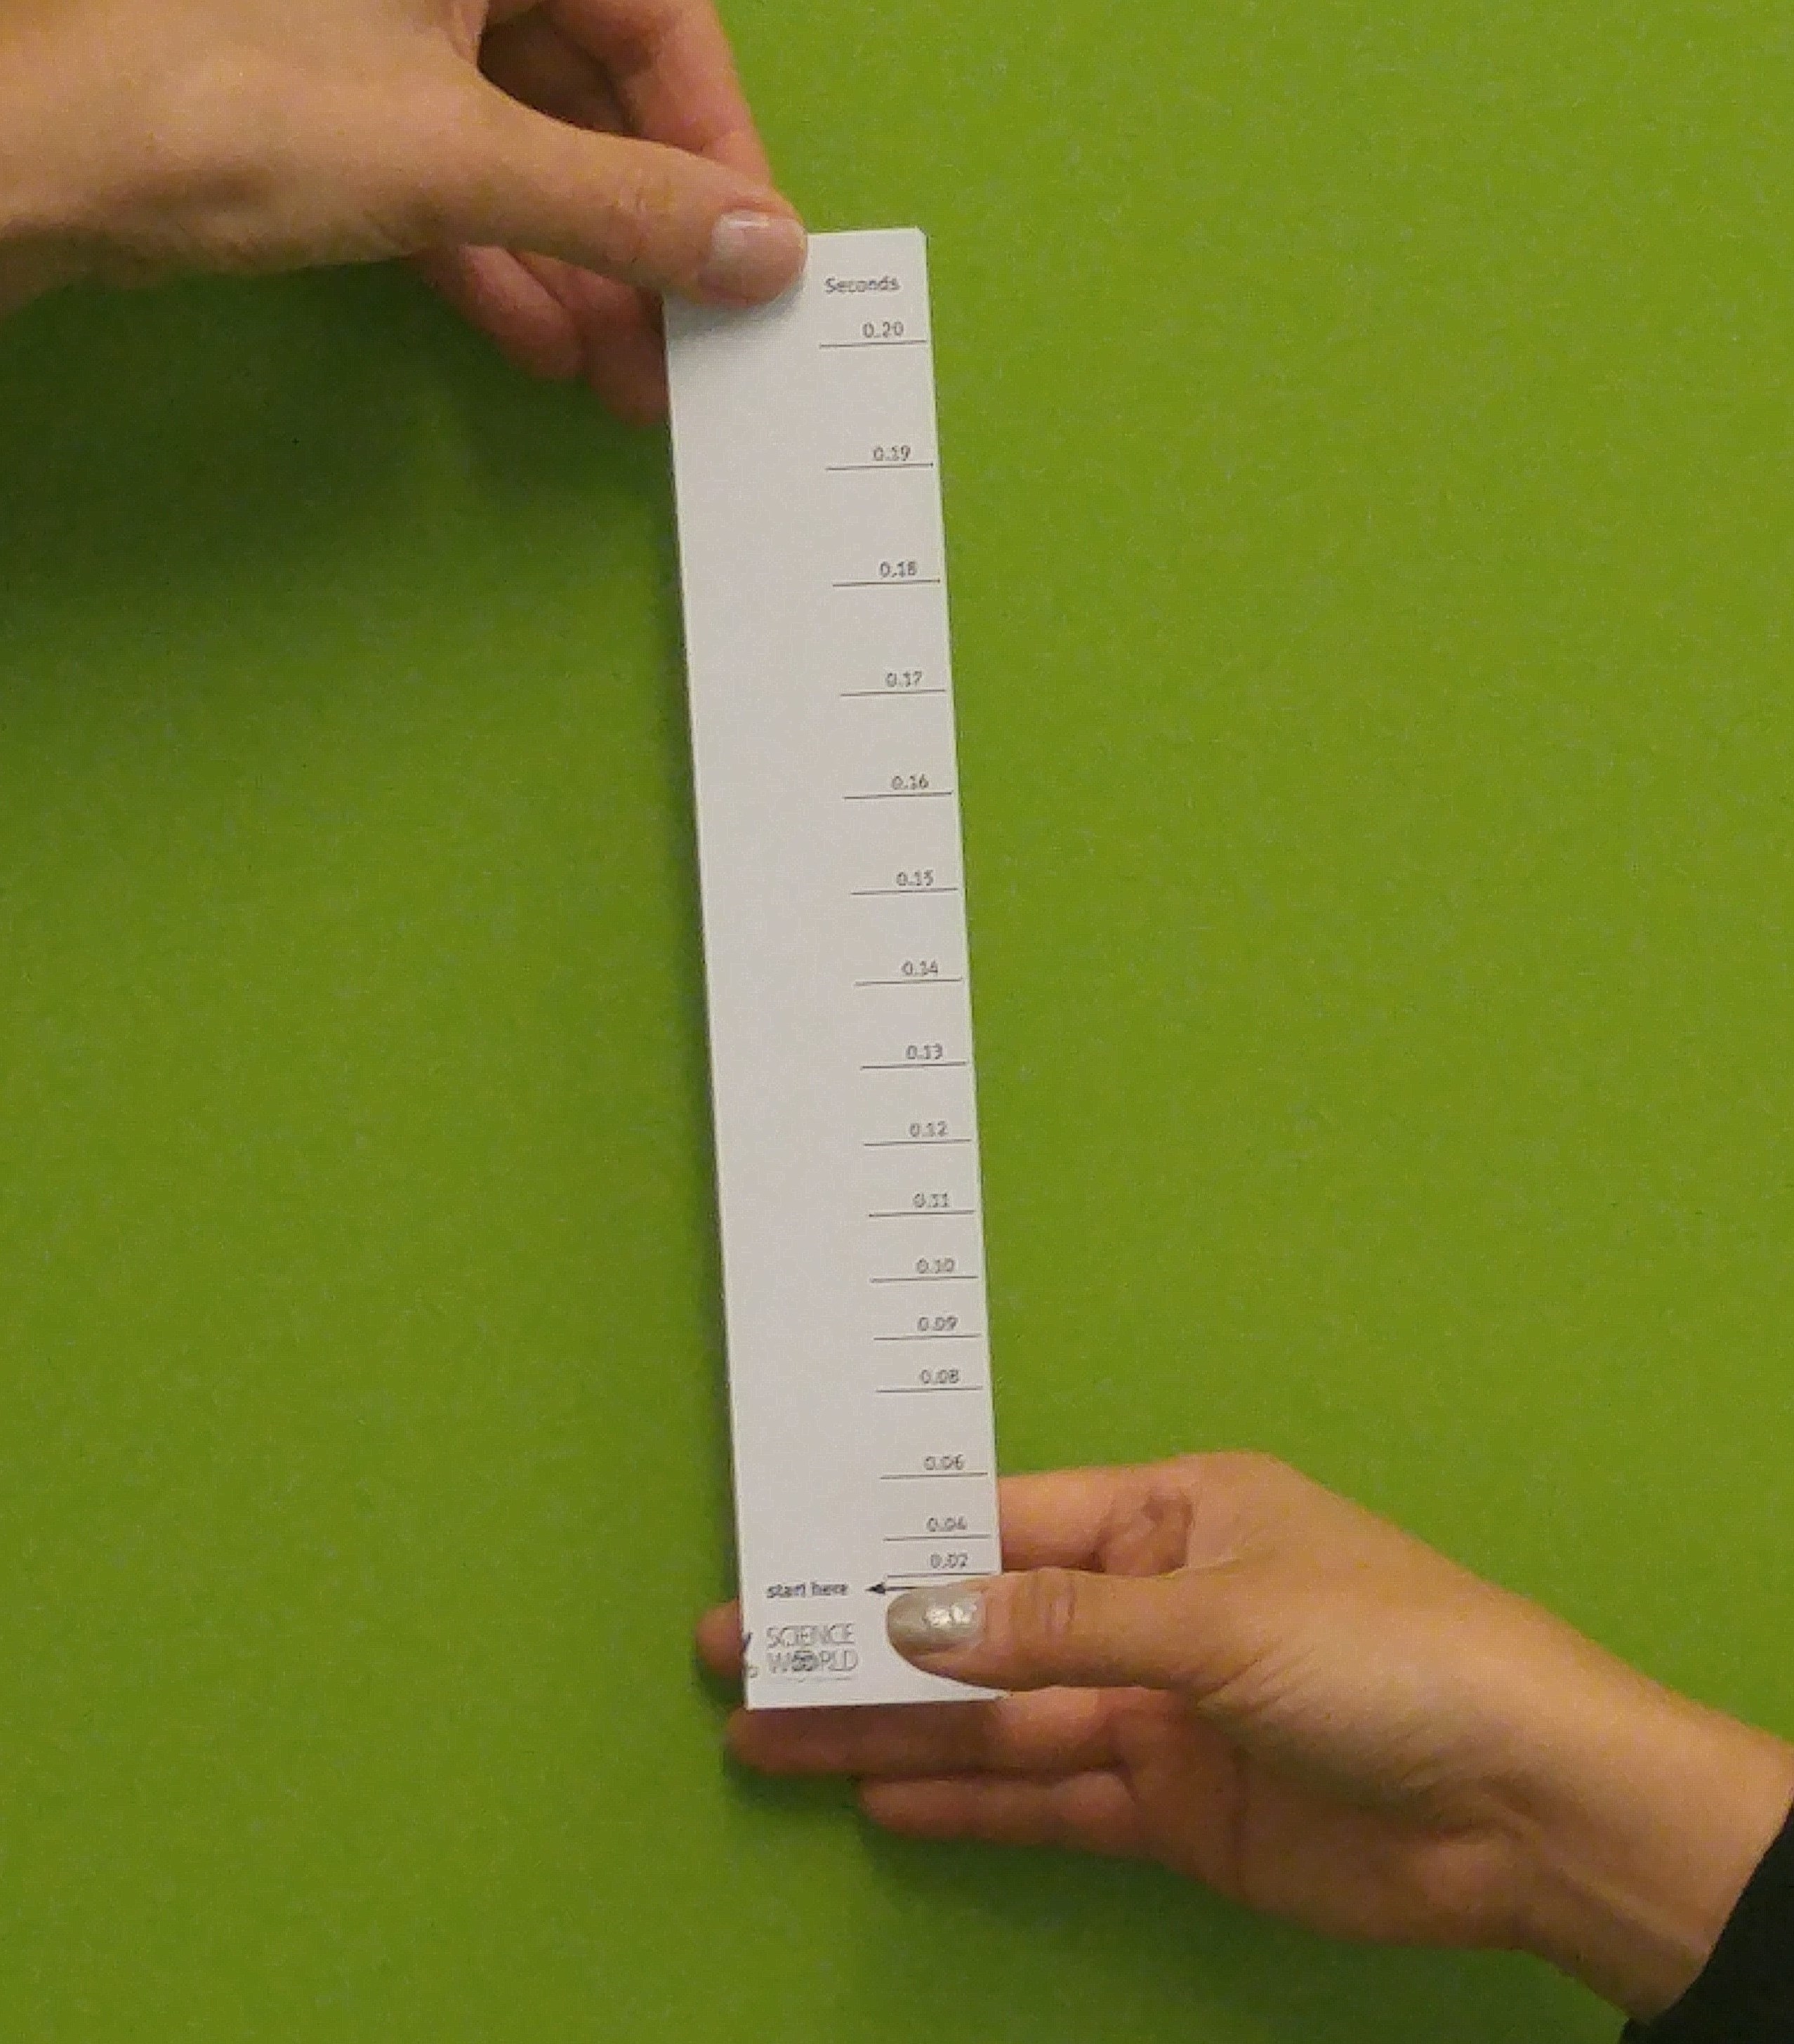 How to measure reaction time with a ruler